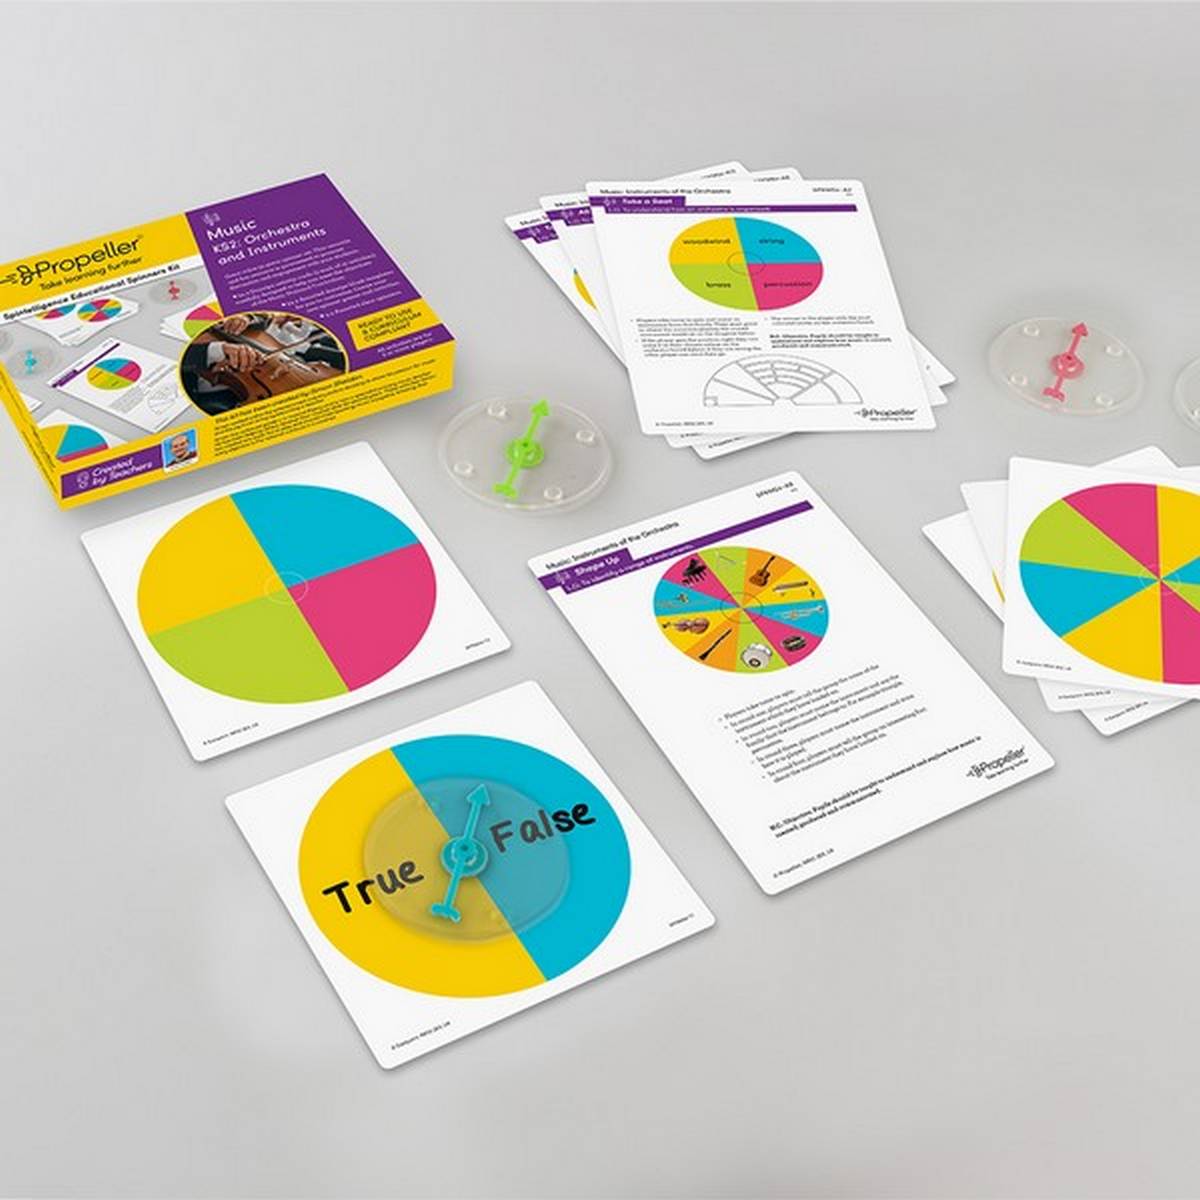 KS2 Orchestra and instruments Spinner Kit